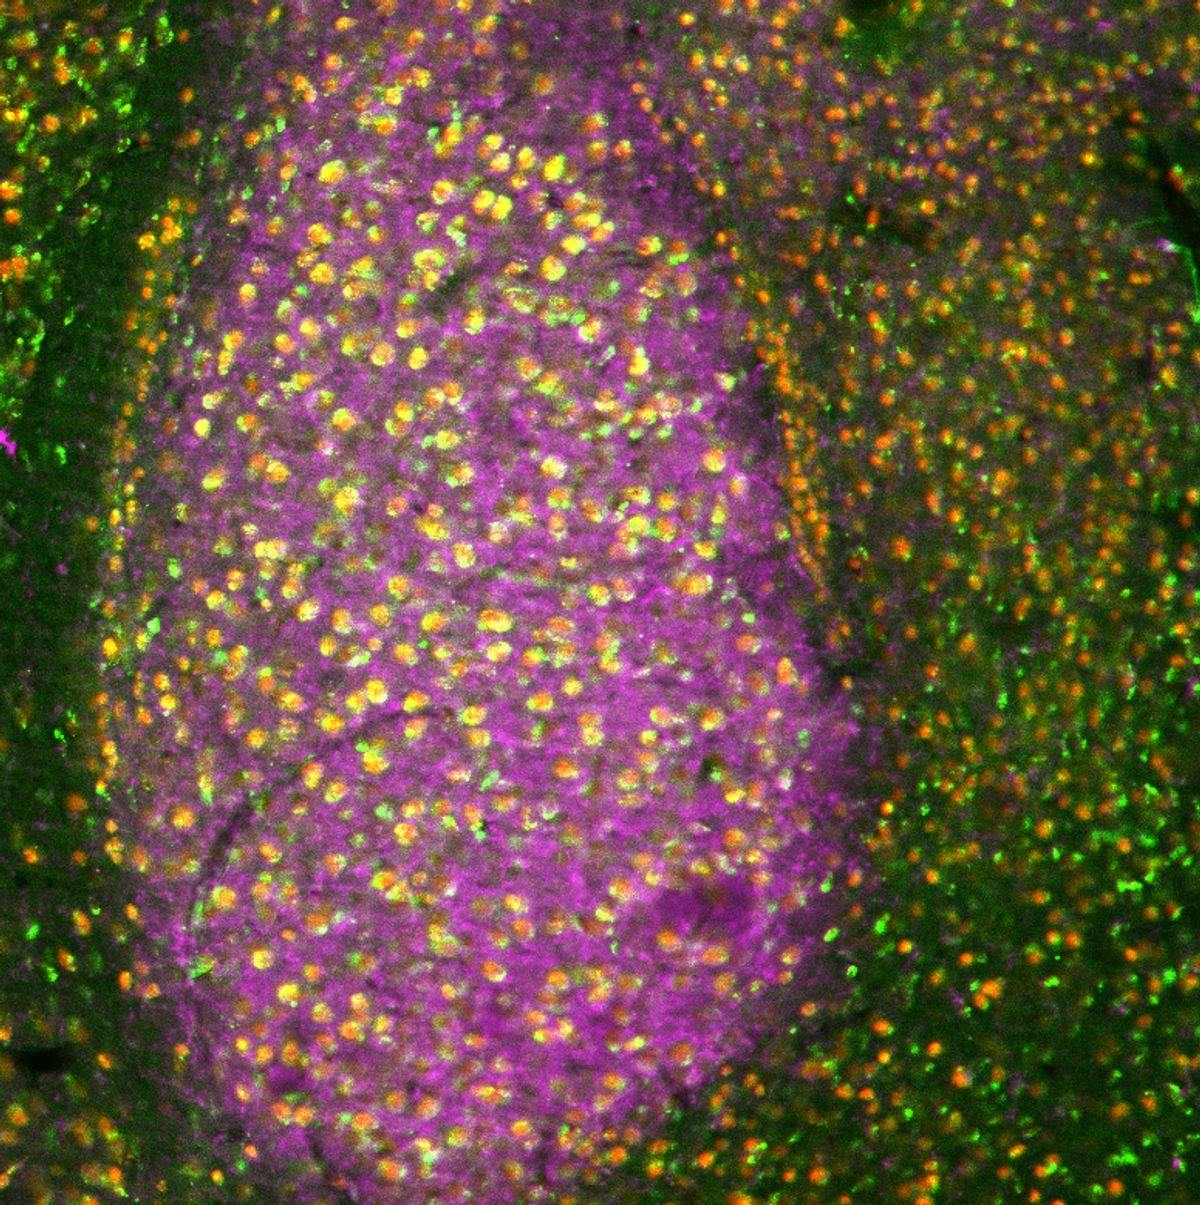 The image shows a brain section of the mouse amygdala. Using fluorescent markers, the expression of synapses is shown in purple, while neurons are shown as red dots and the microRNA miR-483-5p is shown as green dots.